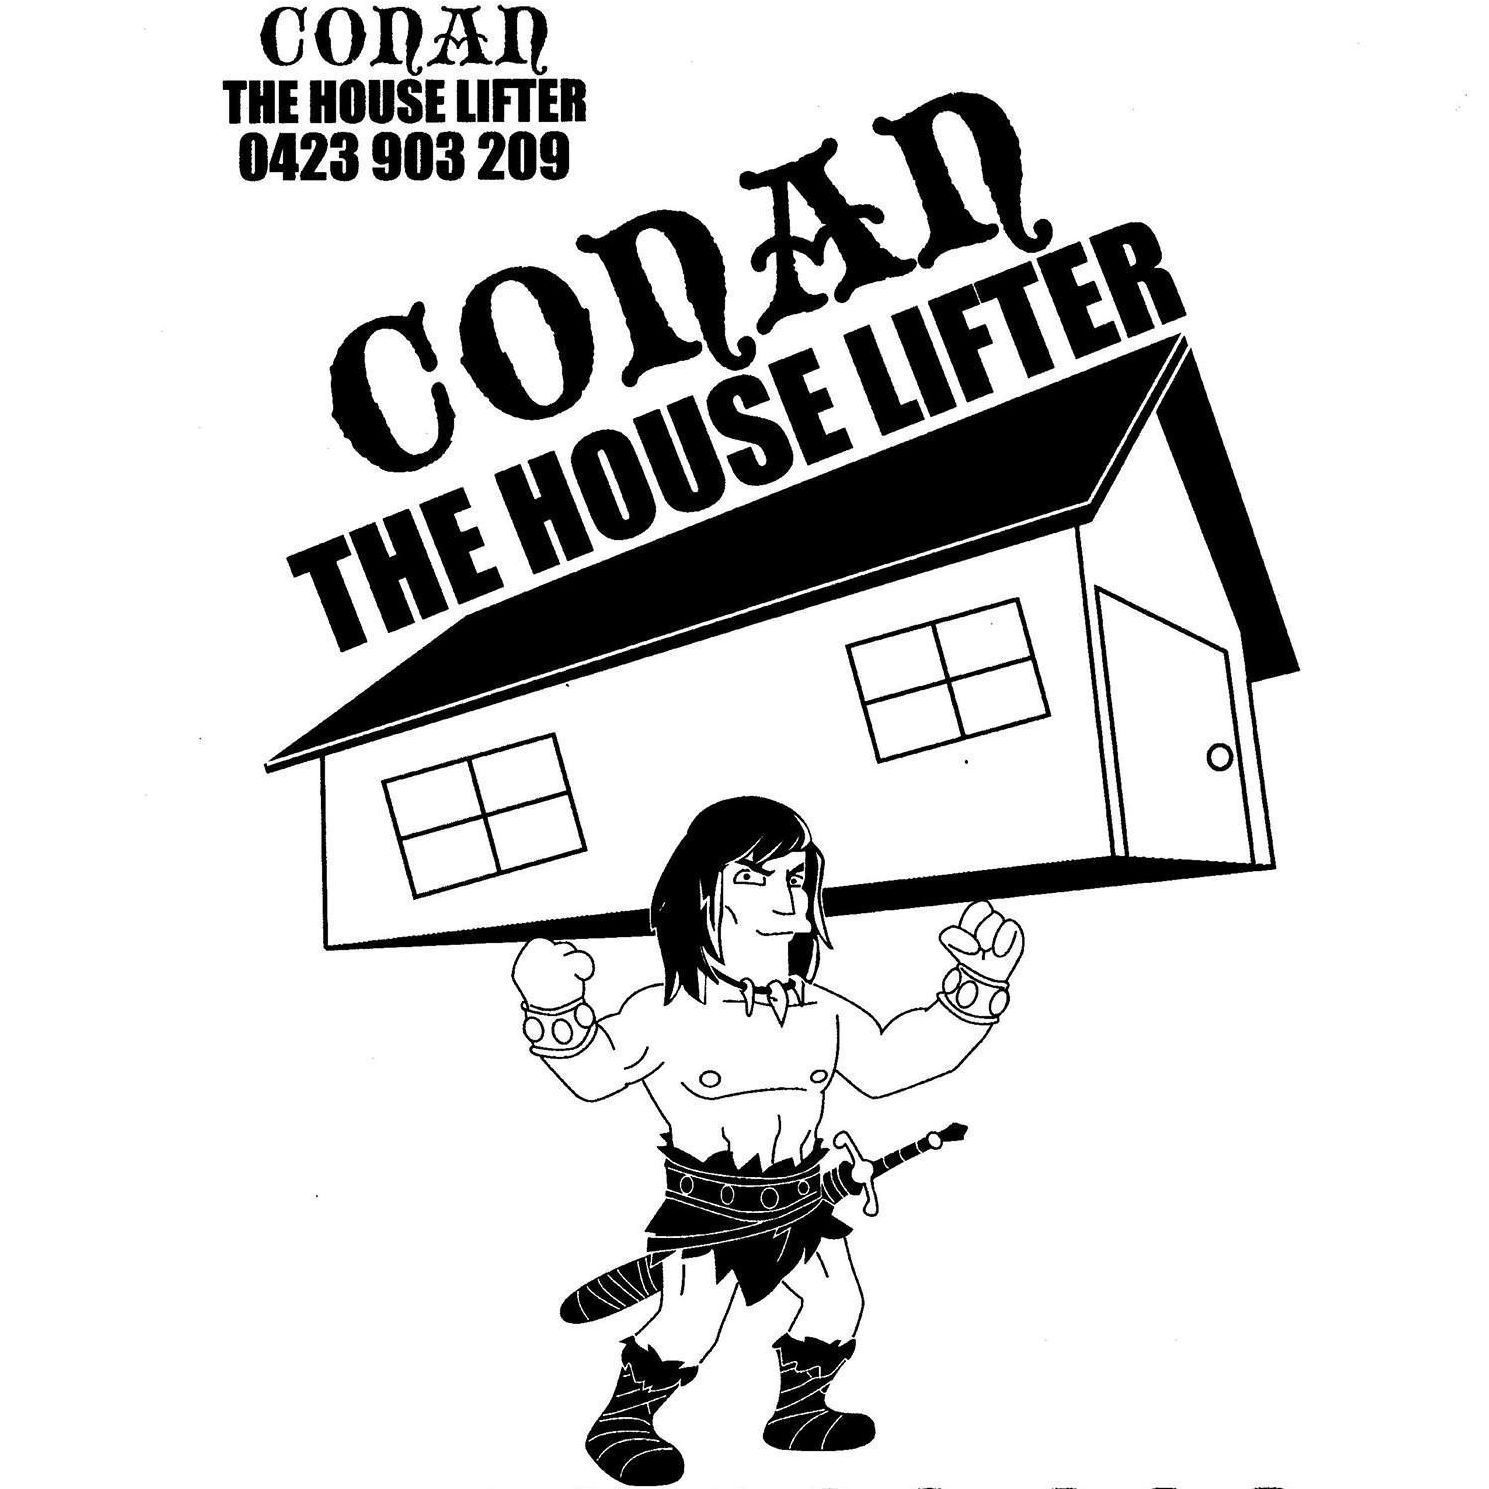 Conan The House Lifter: Relocation & Restumping in Townsville